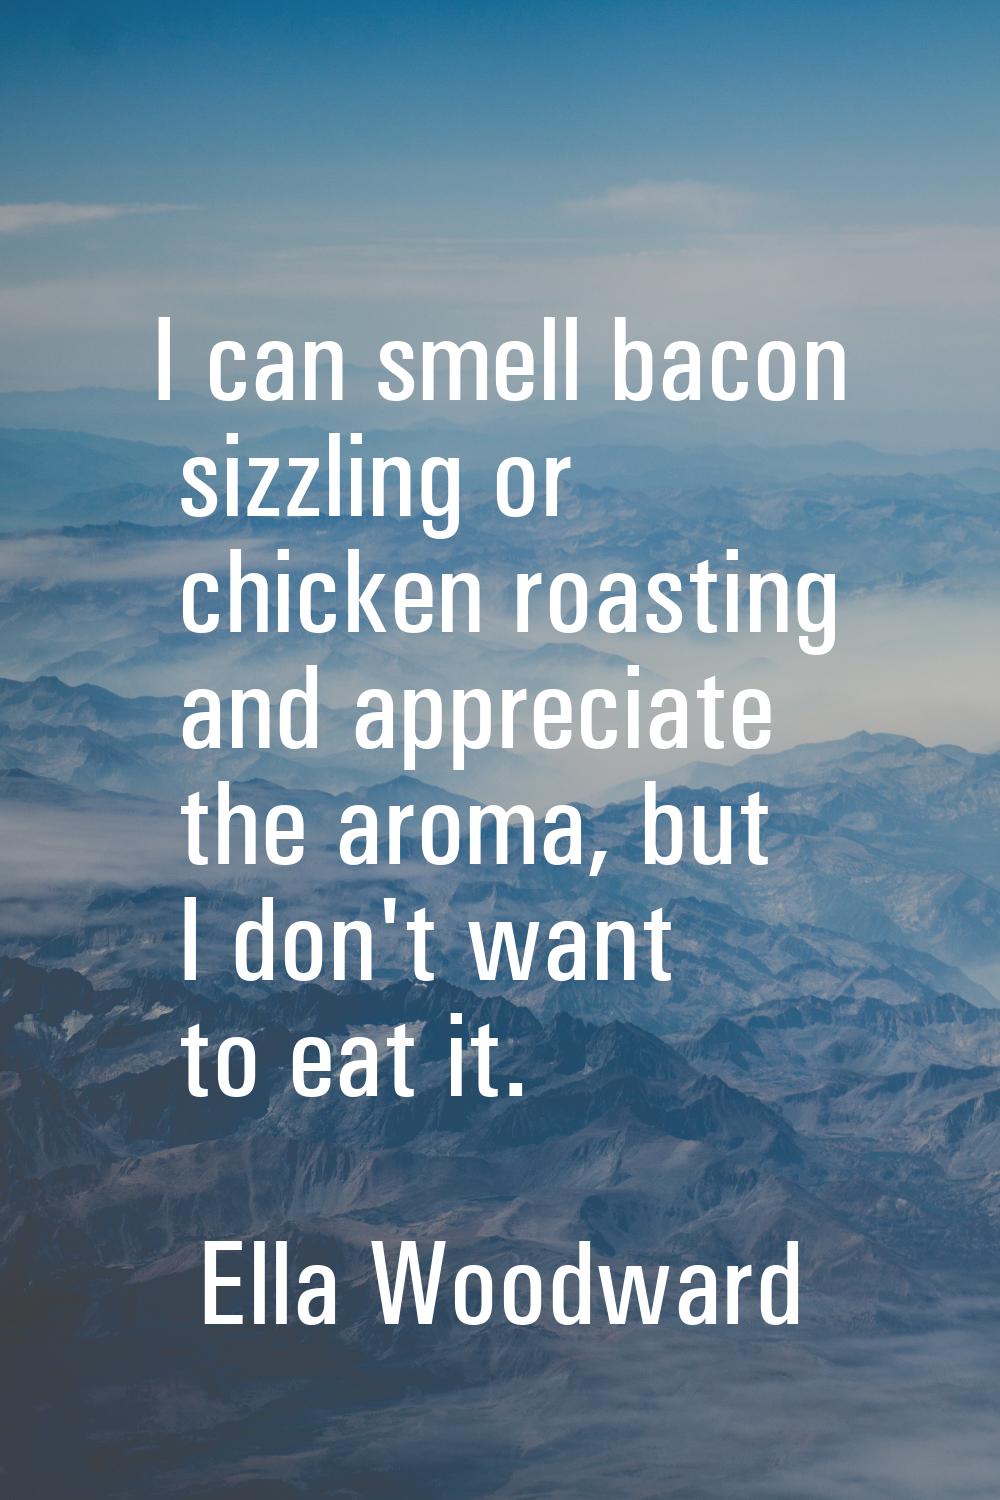 I can smell bacon sizzling or chicken roasting and appreciate the aroma, but I don't want to eat it